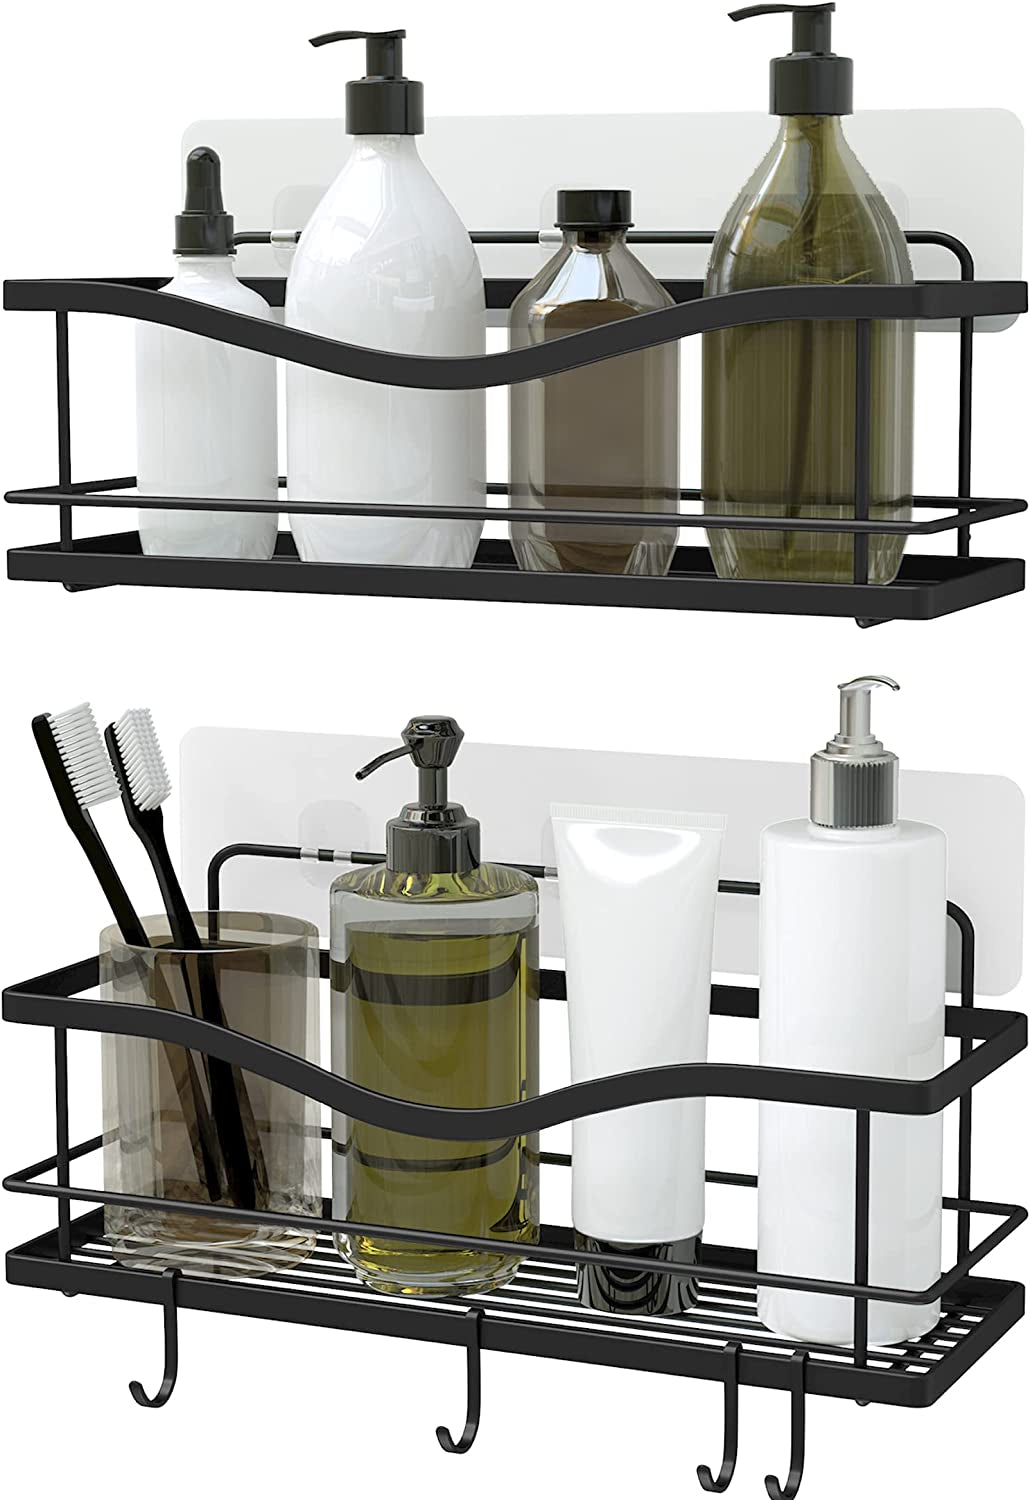 Shower Caddy Basket Shelf Pack of 2 - Adhesive No Drilling Kitchen or Bathroom Wall Racks - Black Shower Storage Shelves for in Shower W/ Hooks for Accessories